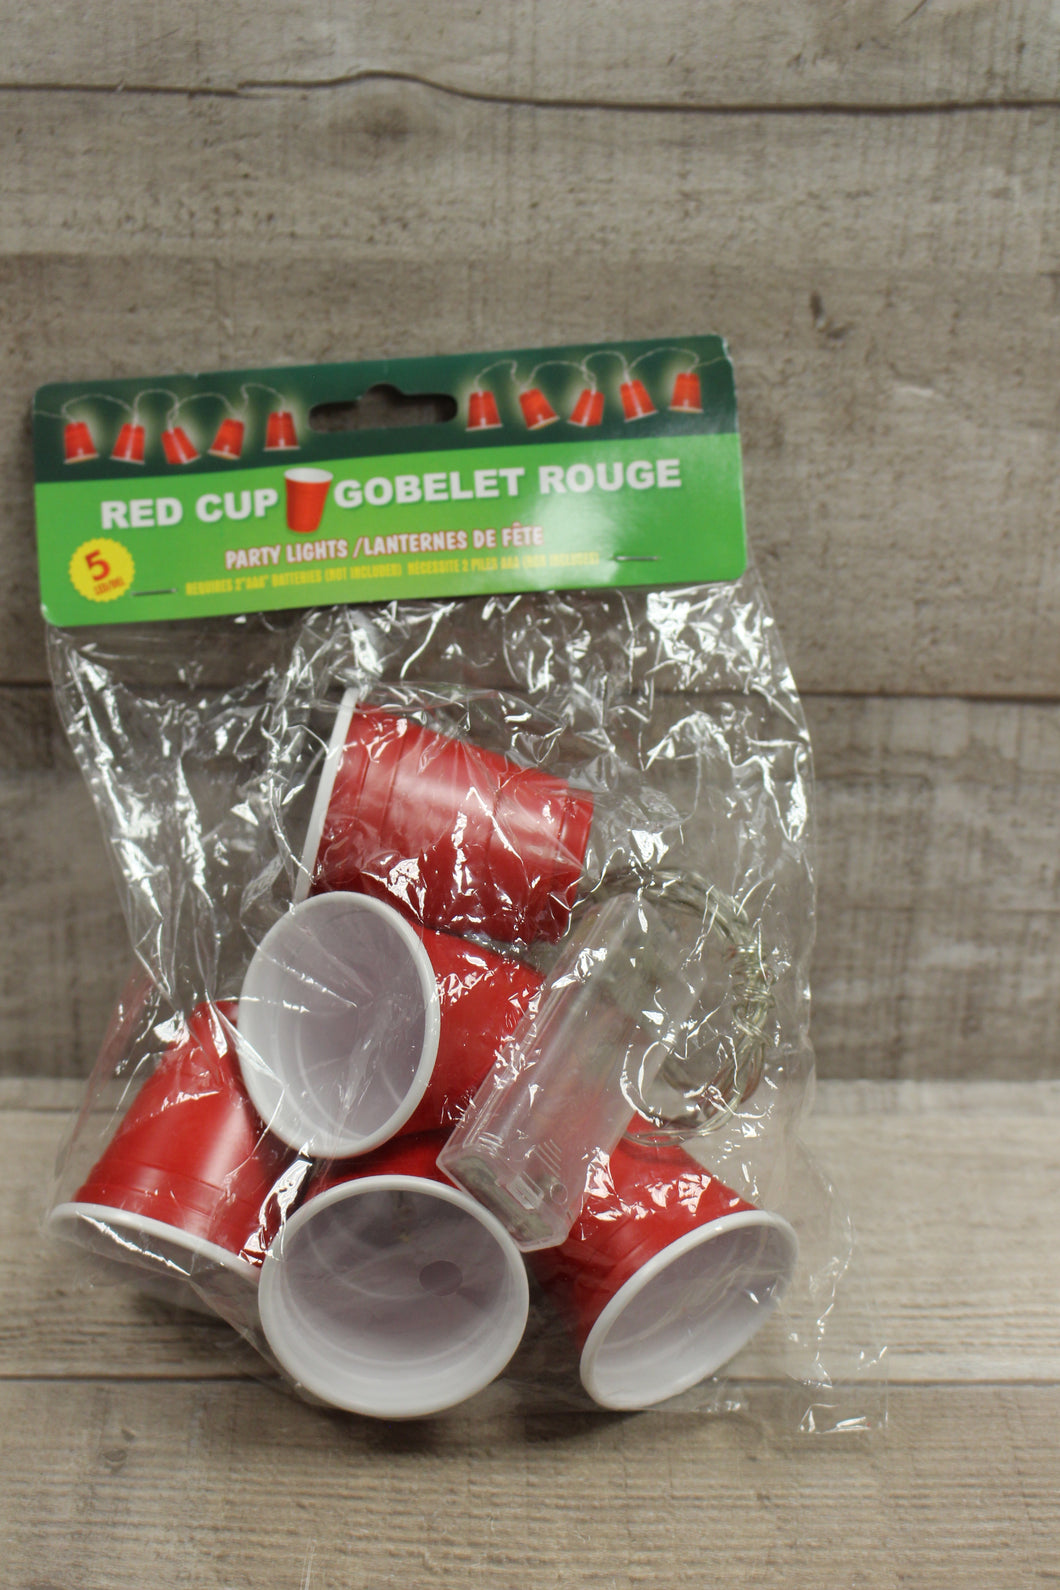 Red Cup Goblet Rouge Party Lights - String of 5 LED Lights -New